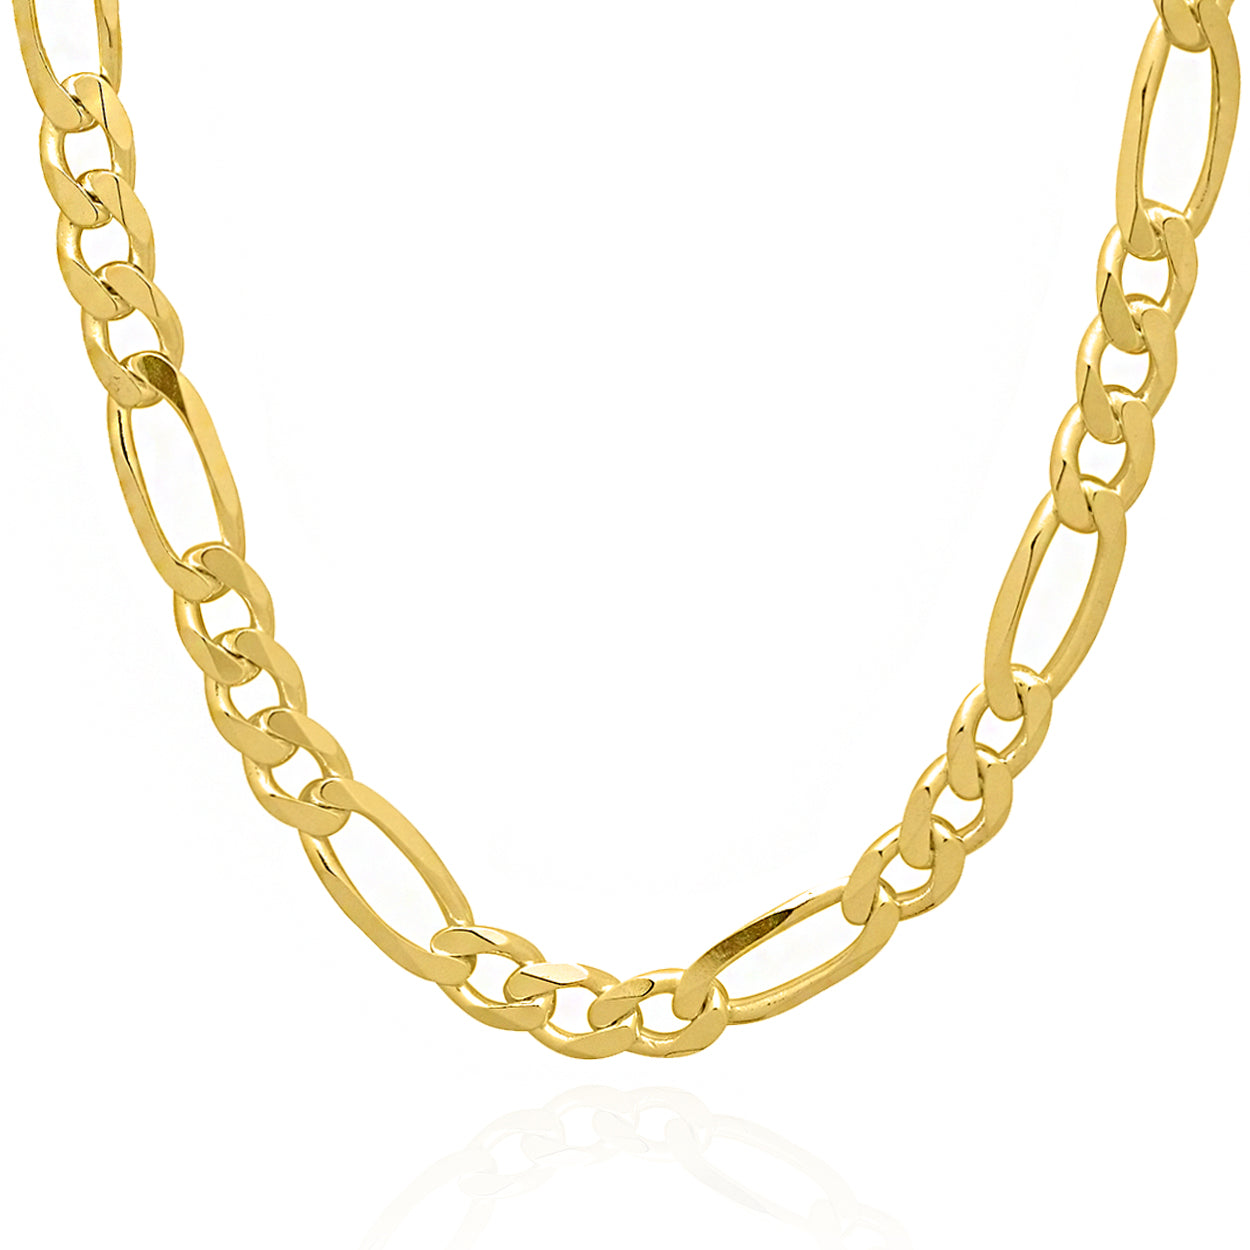 8mm Wide Figaro Style Chain Solid Gold Yellow